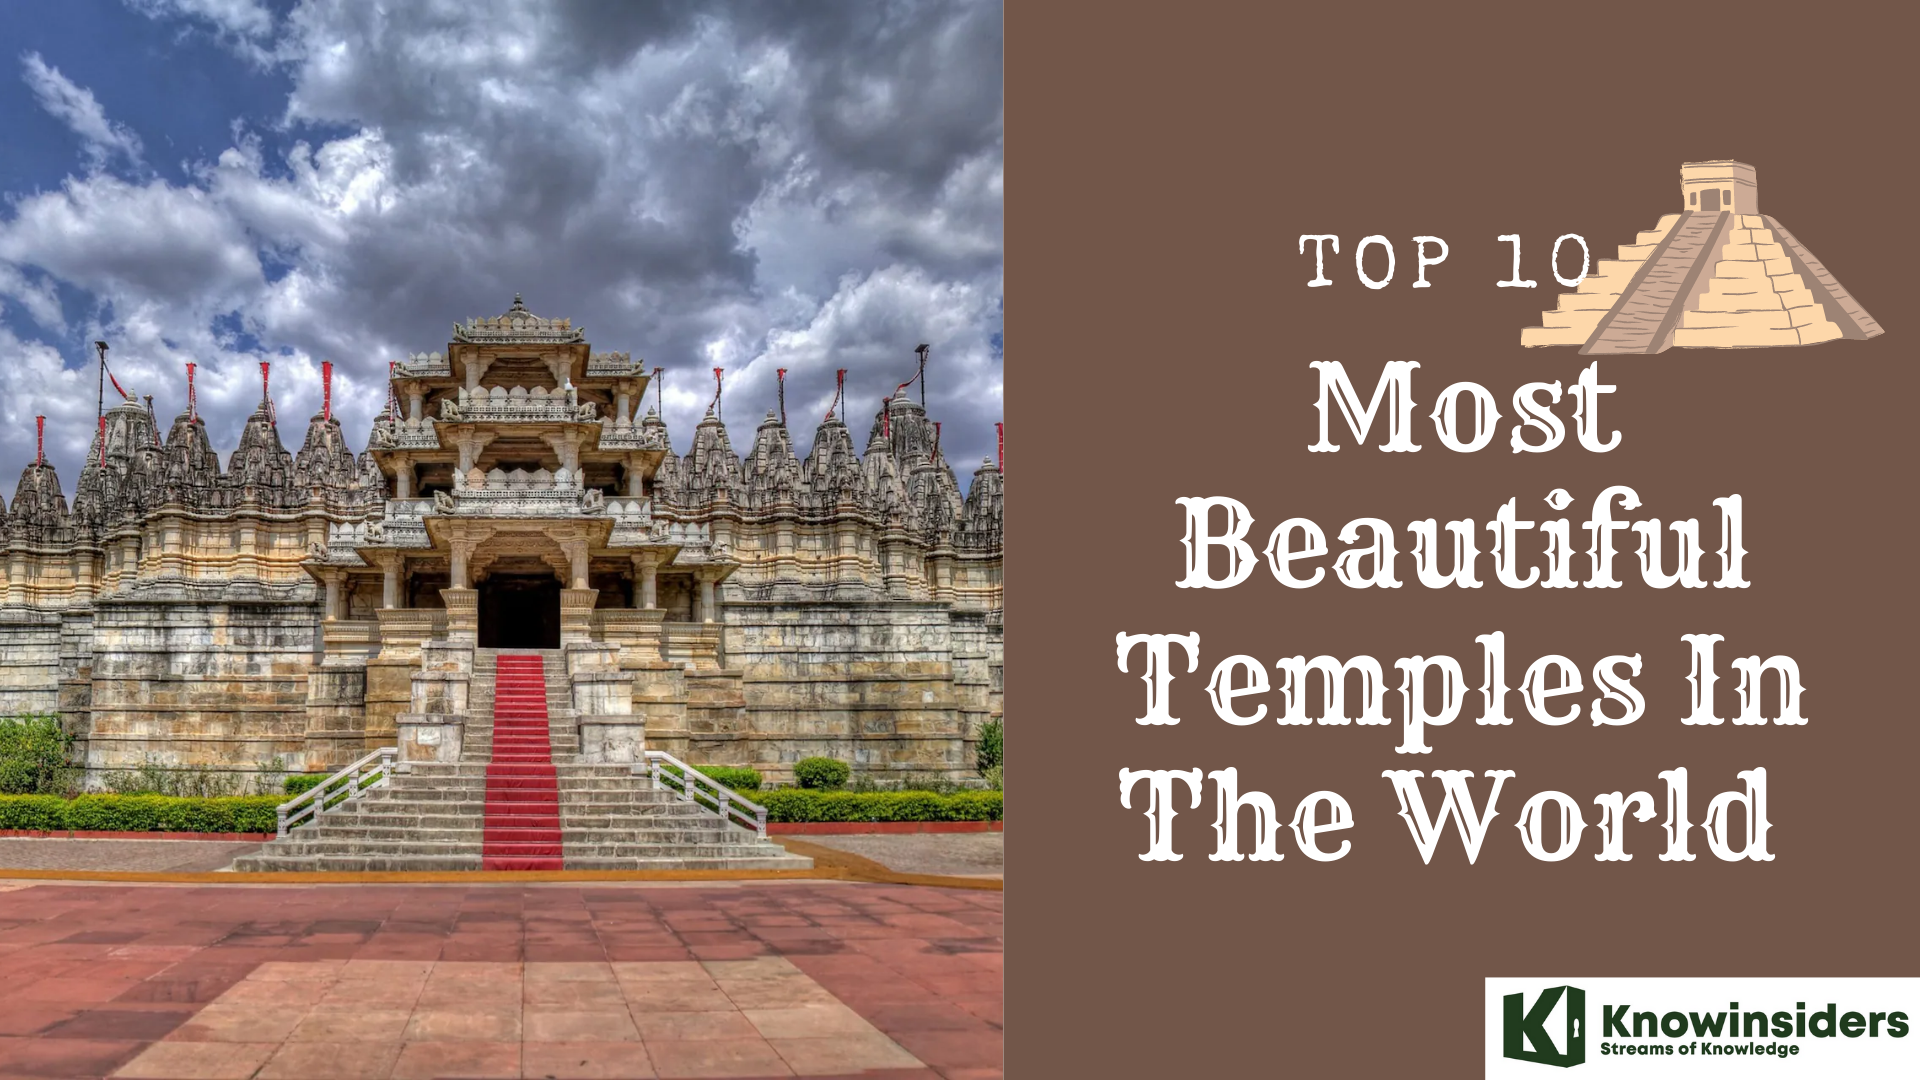 Top 10 Incredible Beautiful Temples in The World